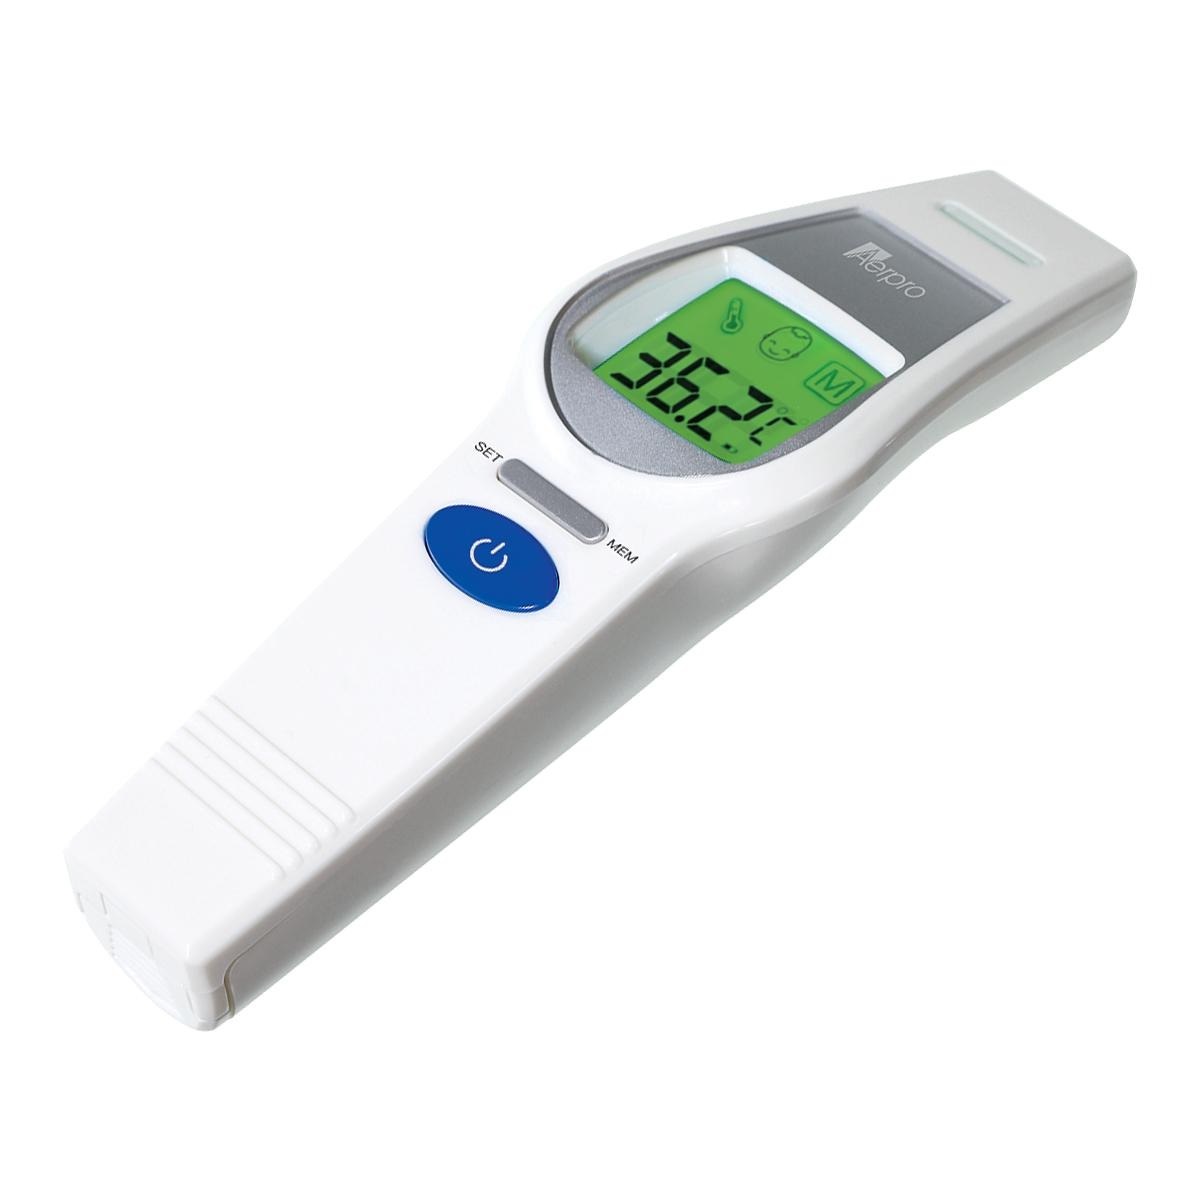 Aerpro Apirt02 Infrared Non Contact Forehead Thermometer Body Object Temperature Measuring Device Oemt2